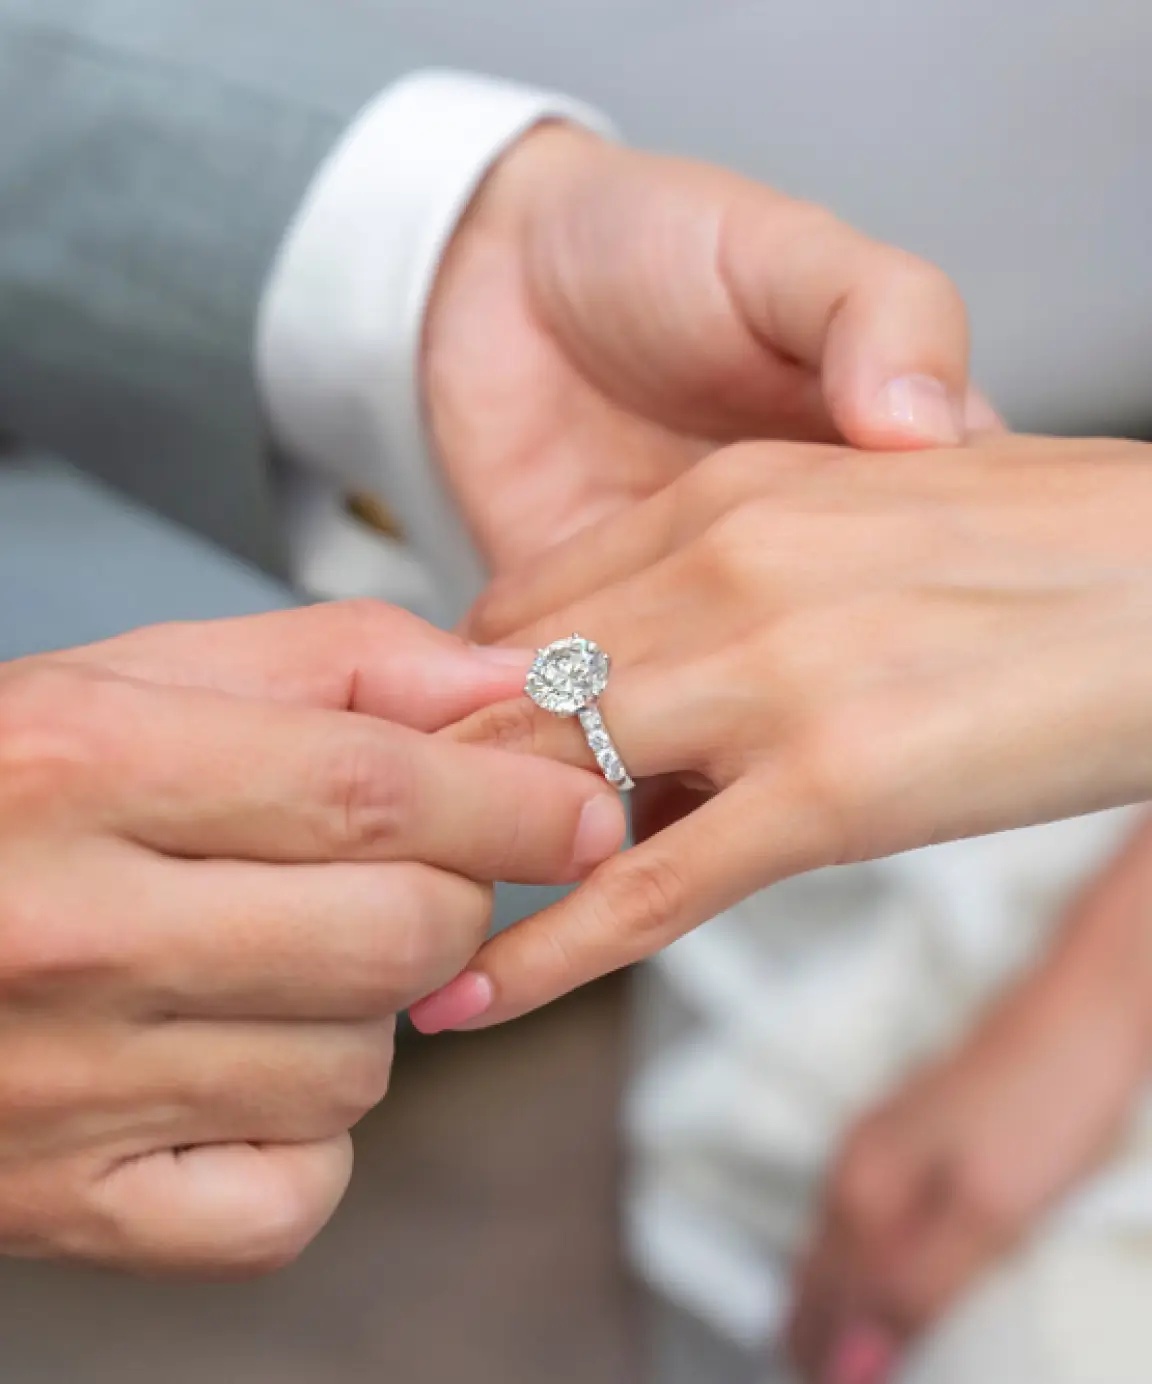 How to Choose the Right Diamond Shape for Your Hand Size